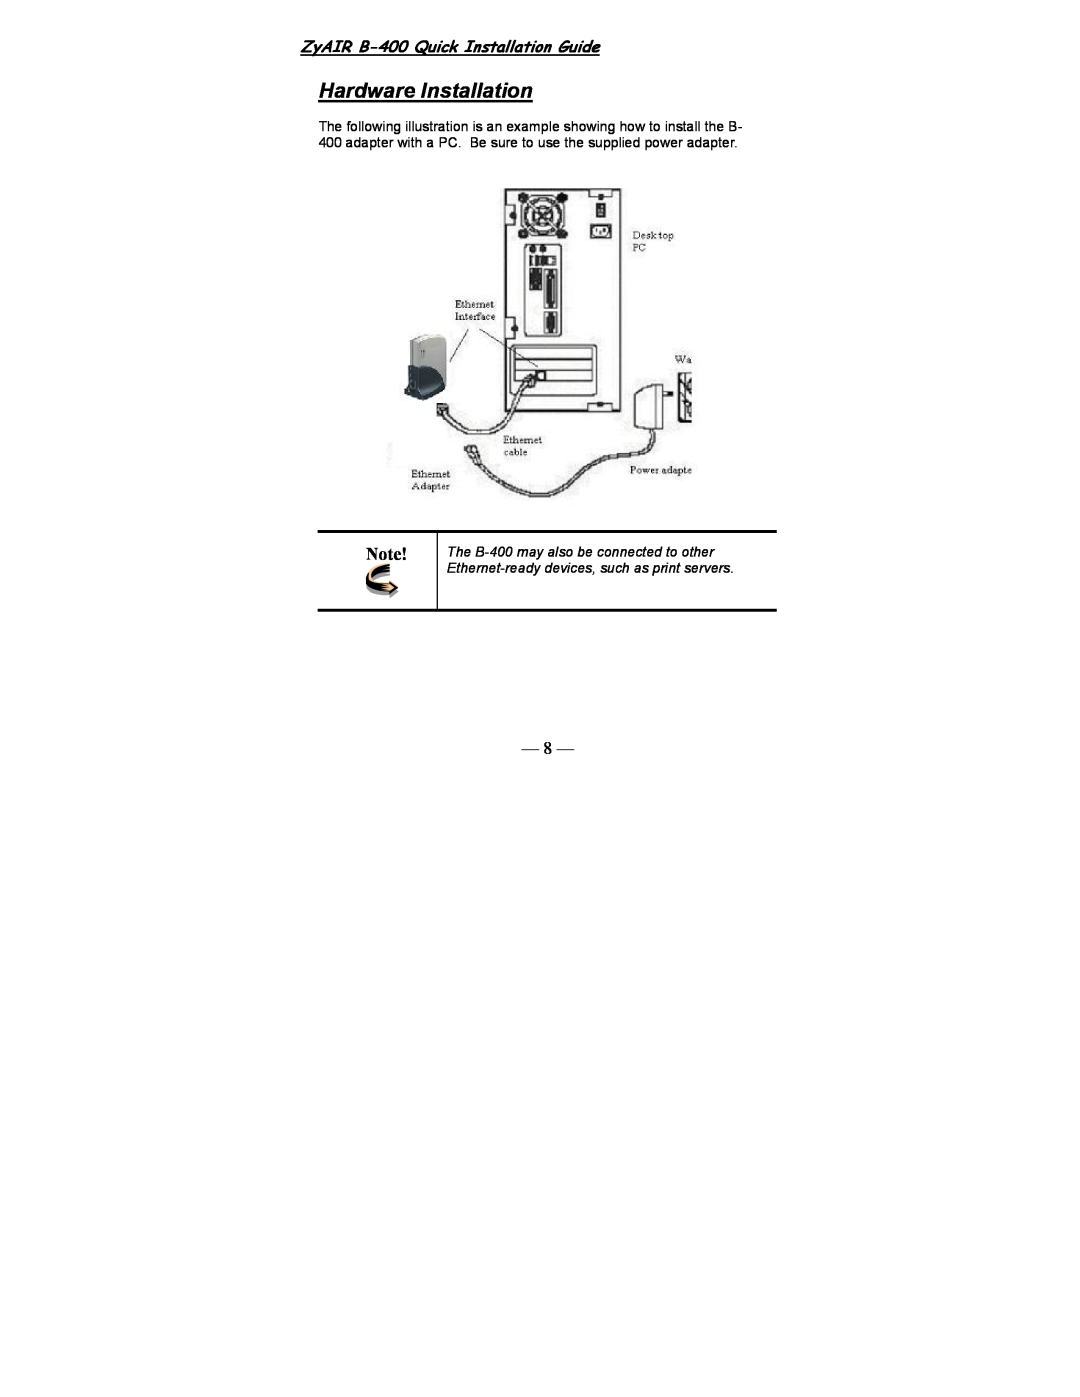 ZyXEL Communications manual Hardware Installation, ZyAIR B-400 Quick Installation Guide 